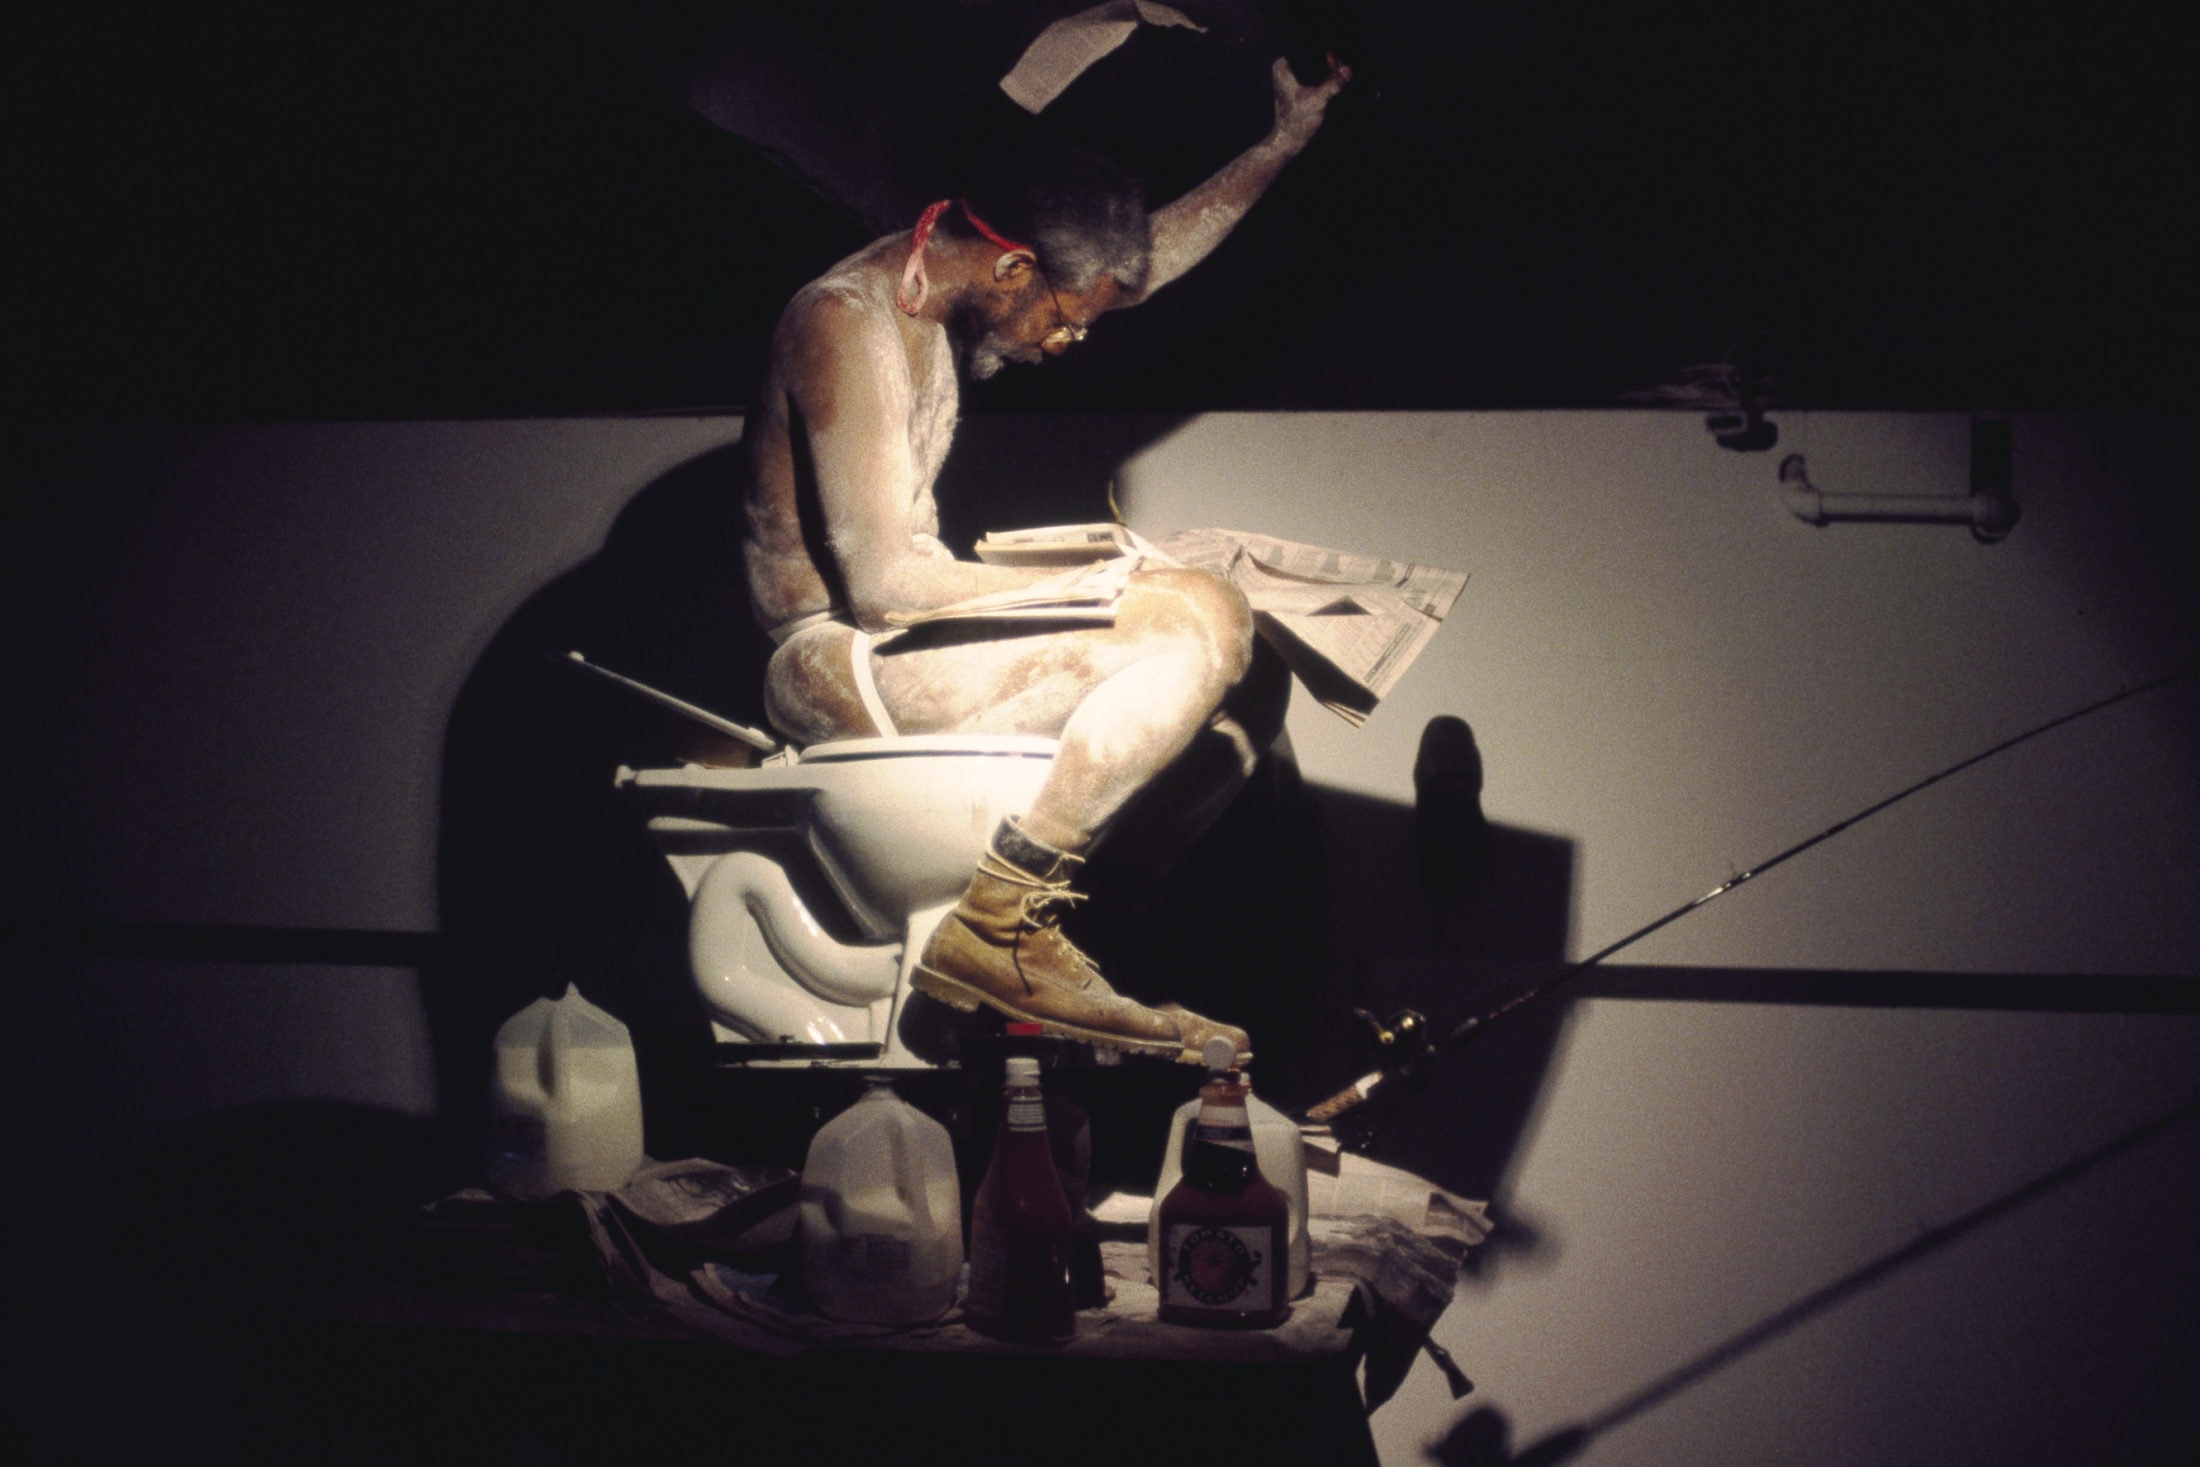 A man sitting on a toilet wearing a jockstrap and covered in flour, tearing pages from a newspaper